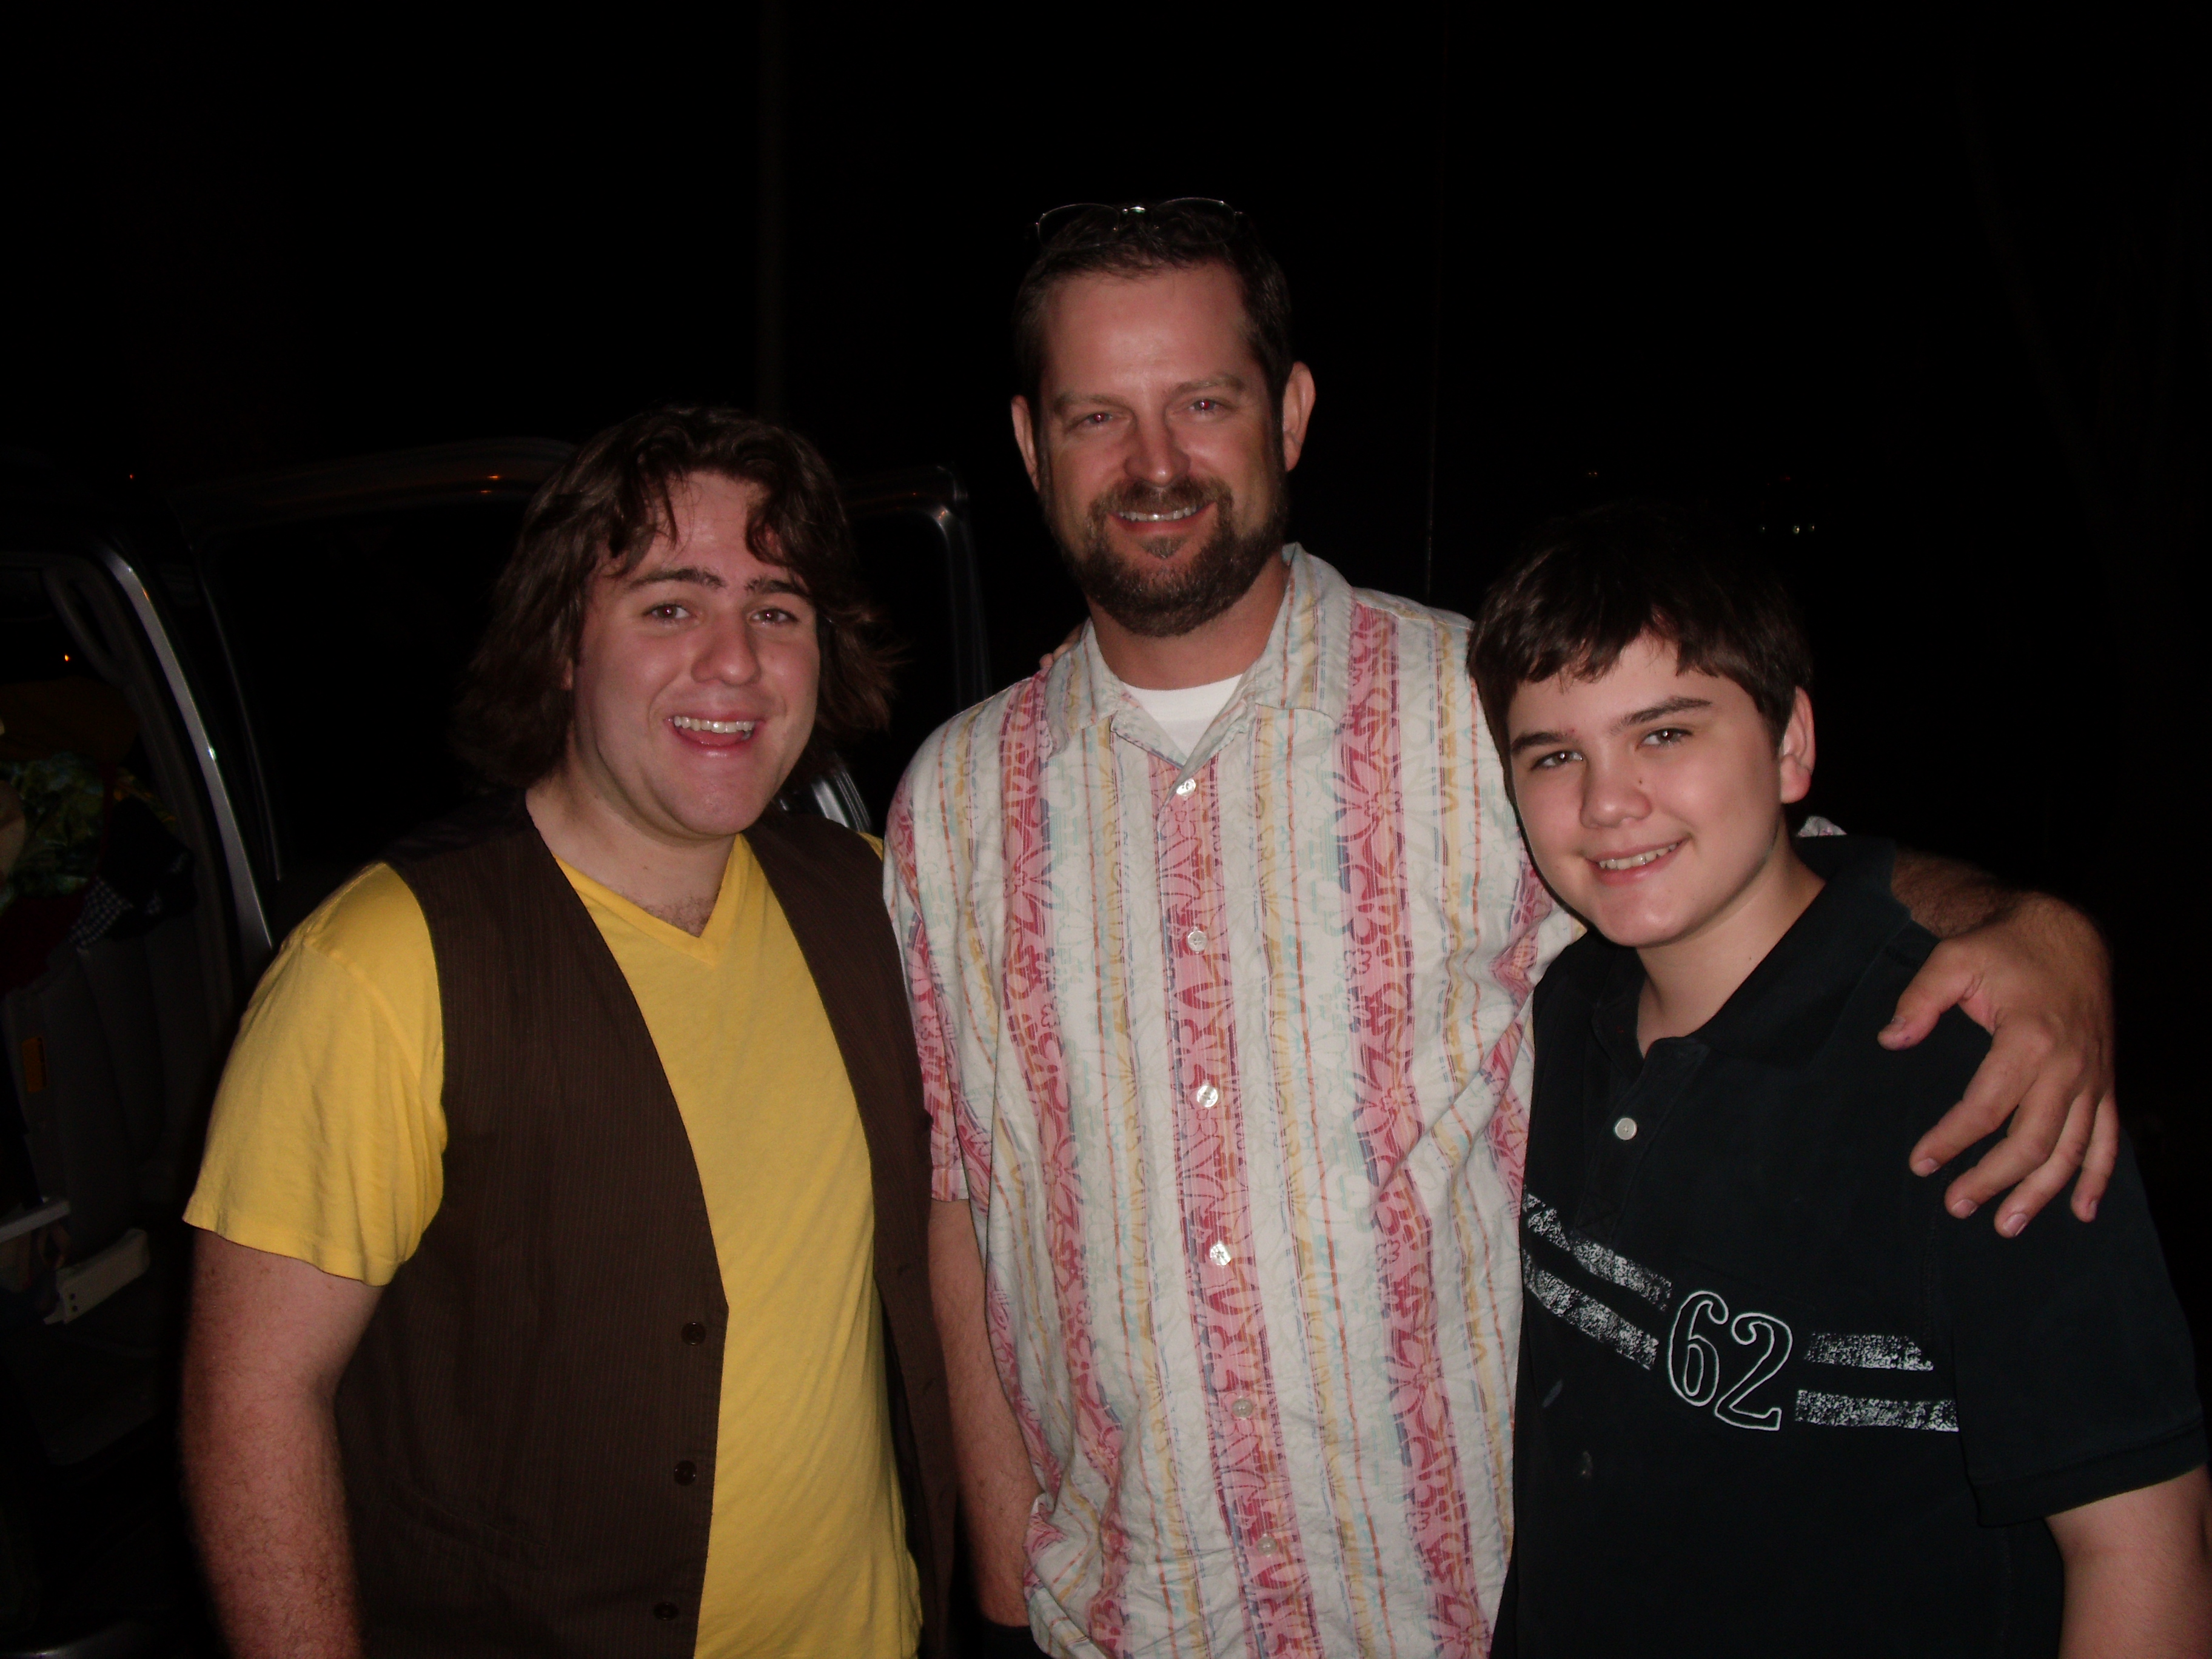 Sean Patrick Flaherty, Kevin Flaherty, and Jameson Moss (Easy A) on the set of Not Your Time.